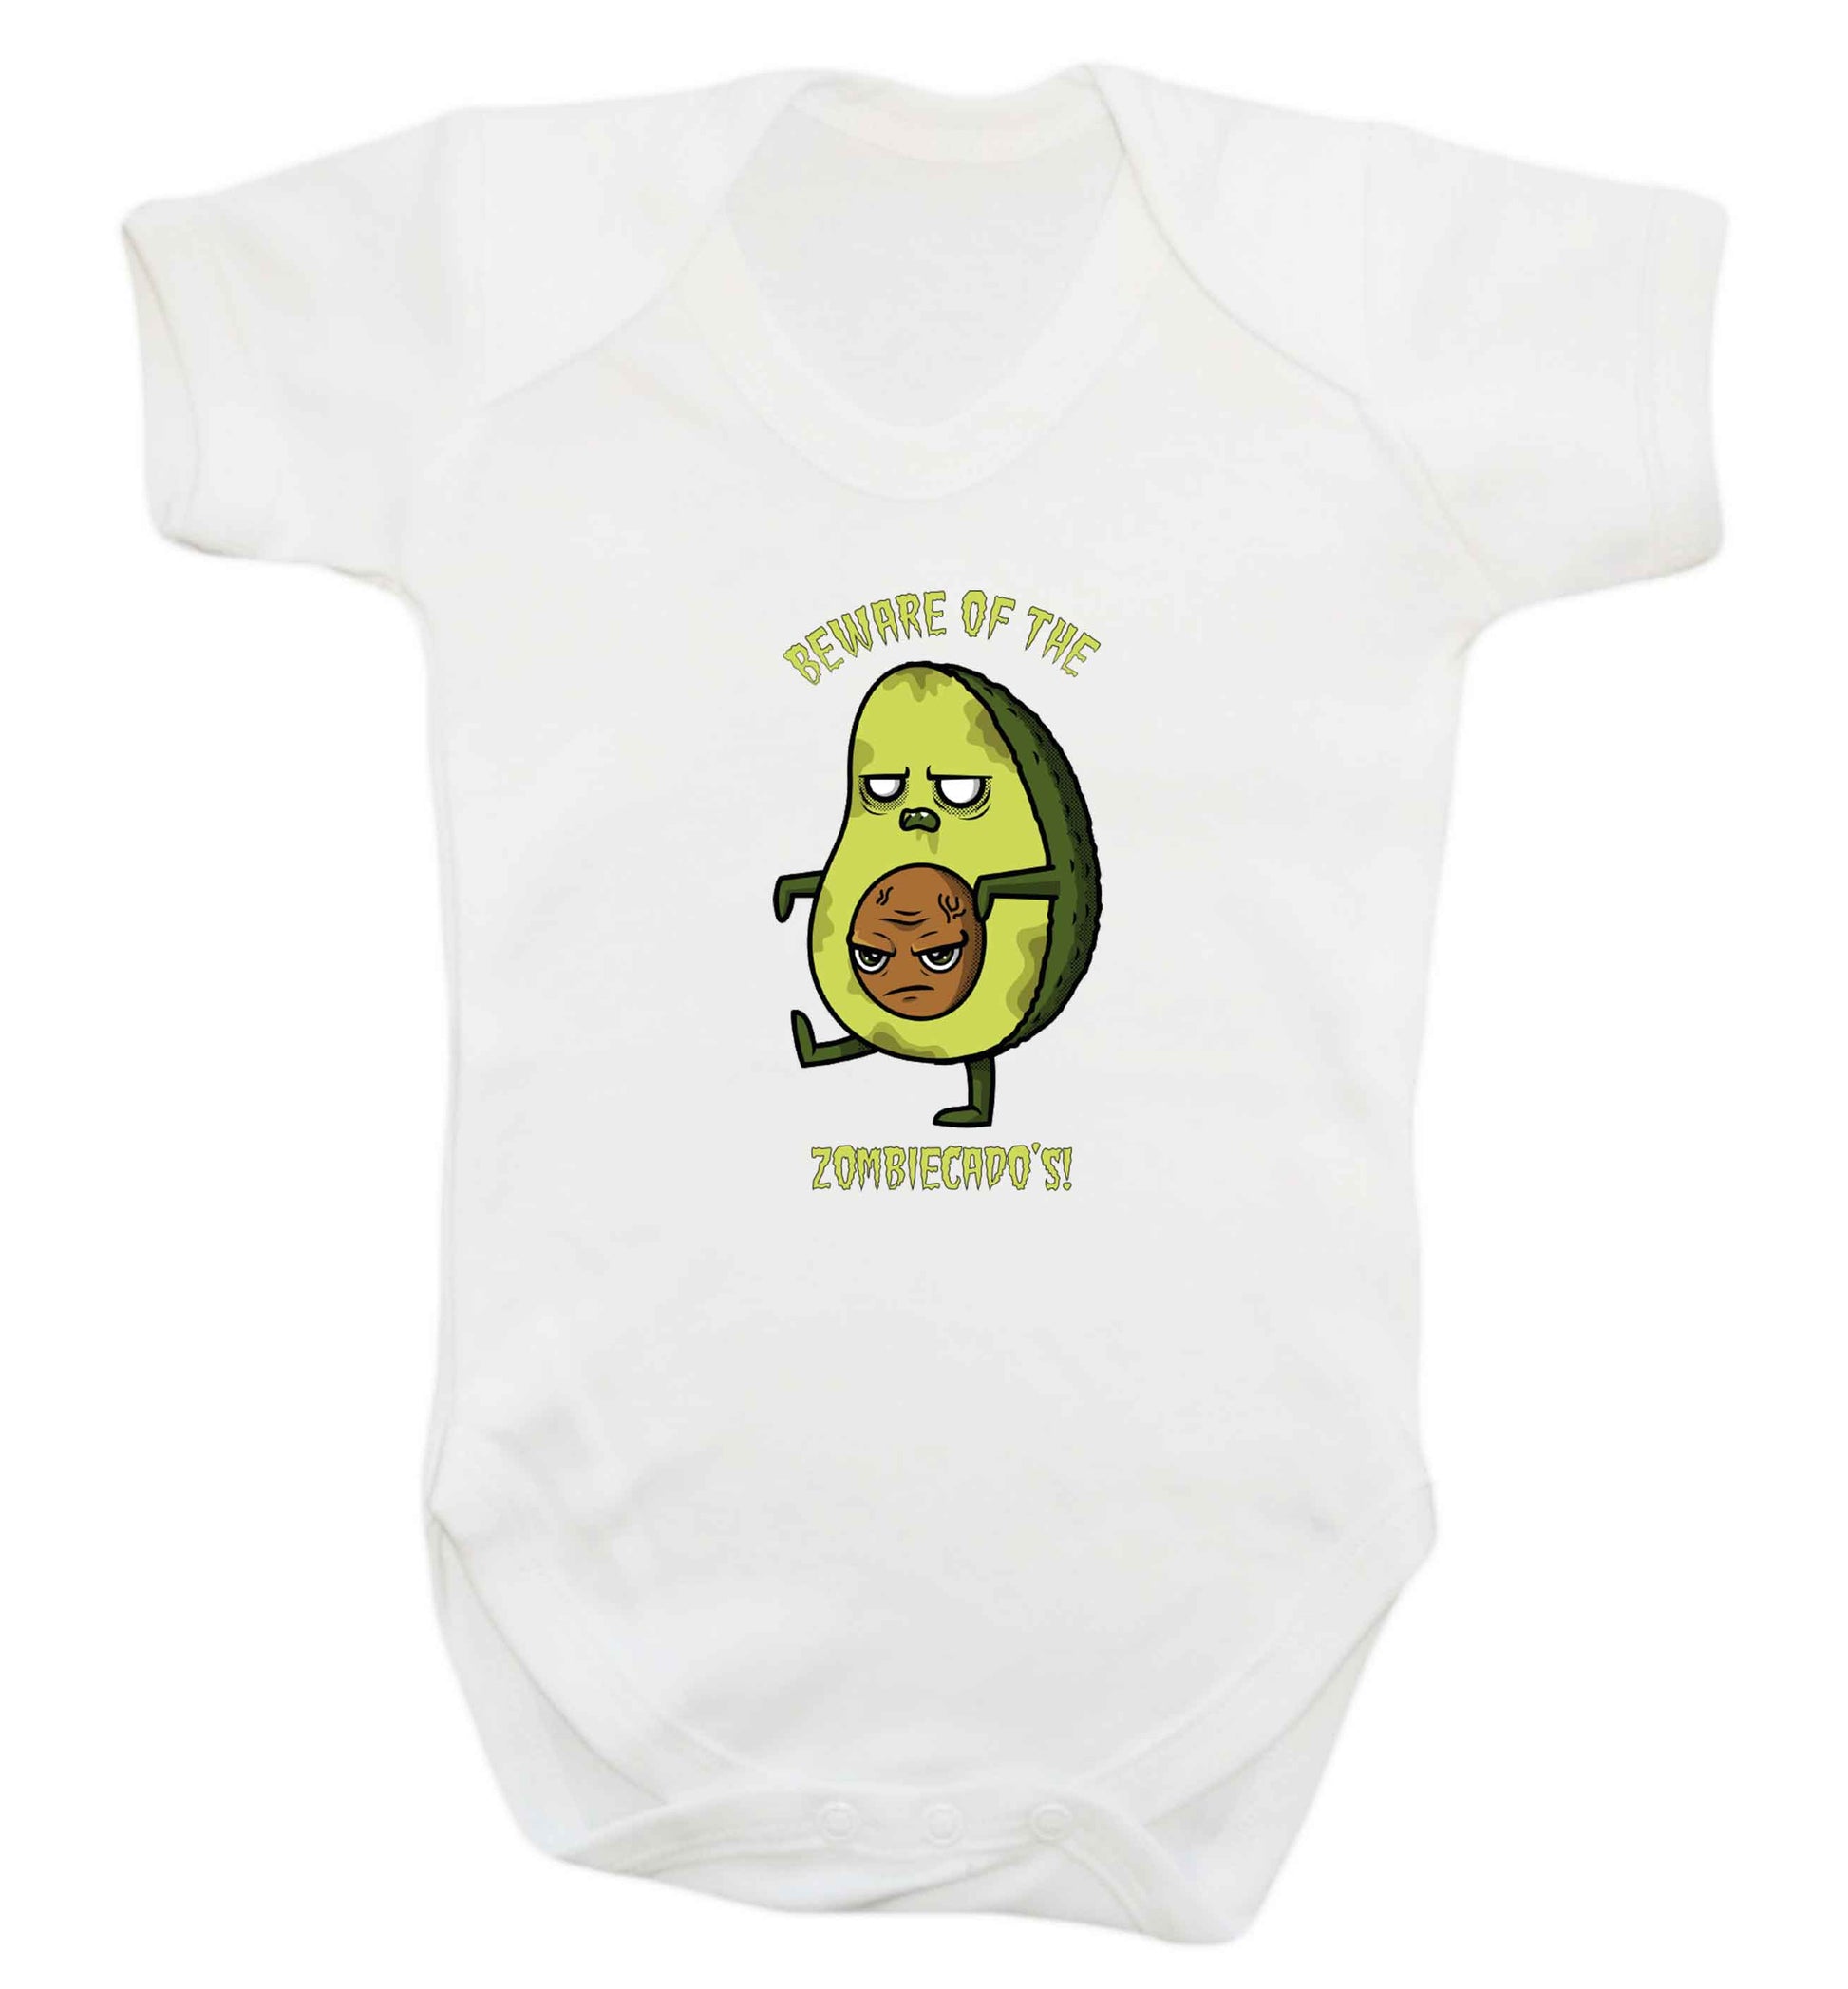 Beware of the zombicado's baby vest white 18-24 months